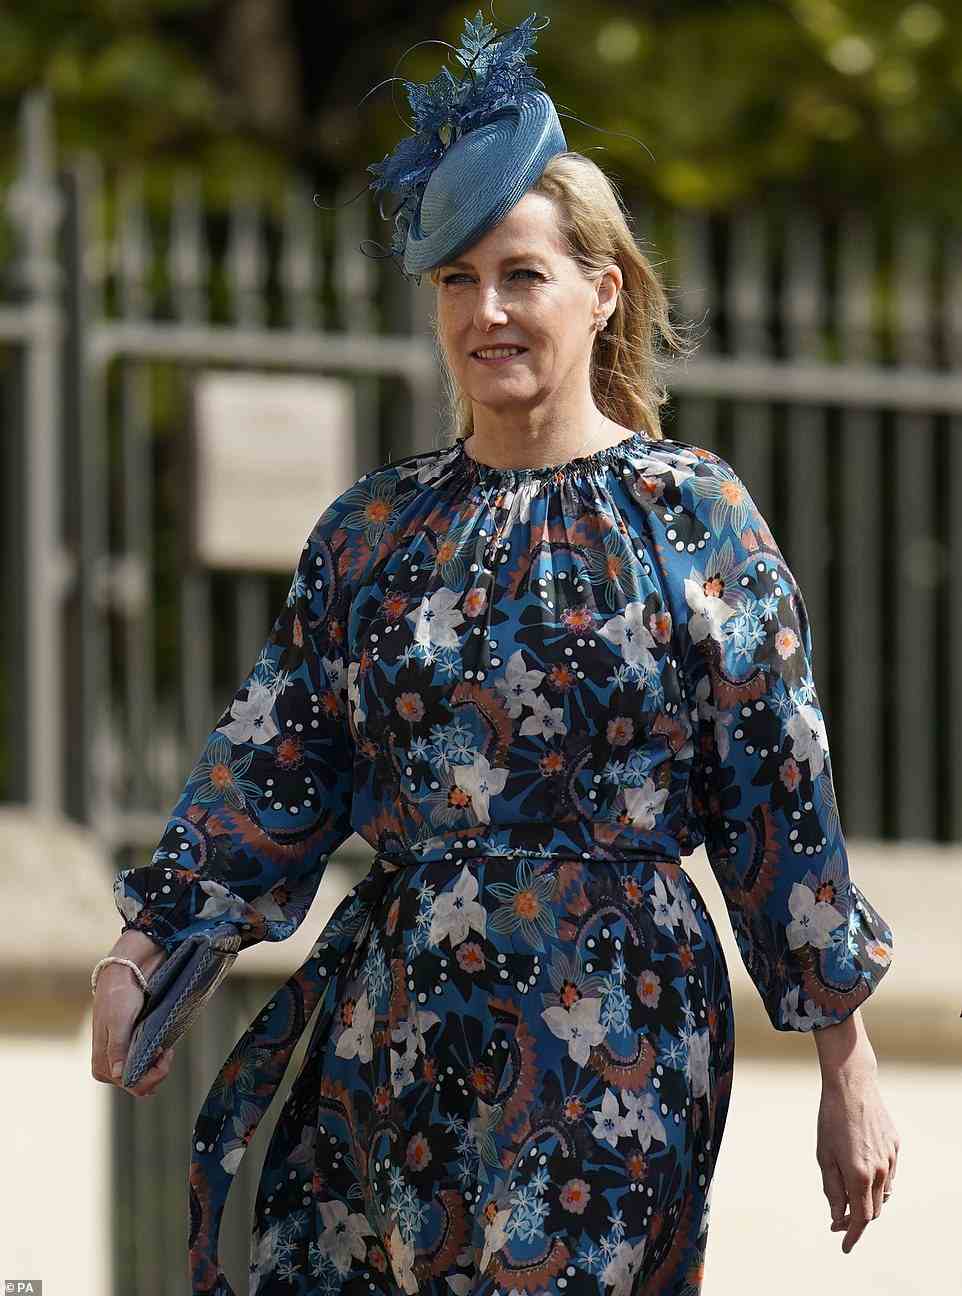 The Countess of Wessex completed her look by wearing her blonde hair in a relaxed style tucked behind her ears